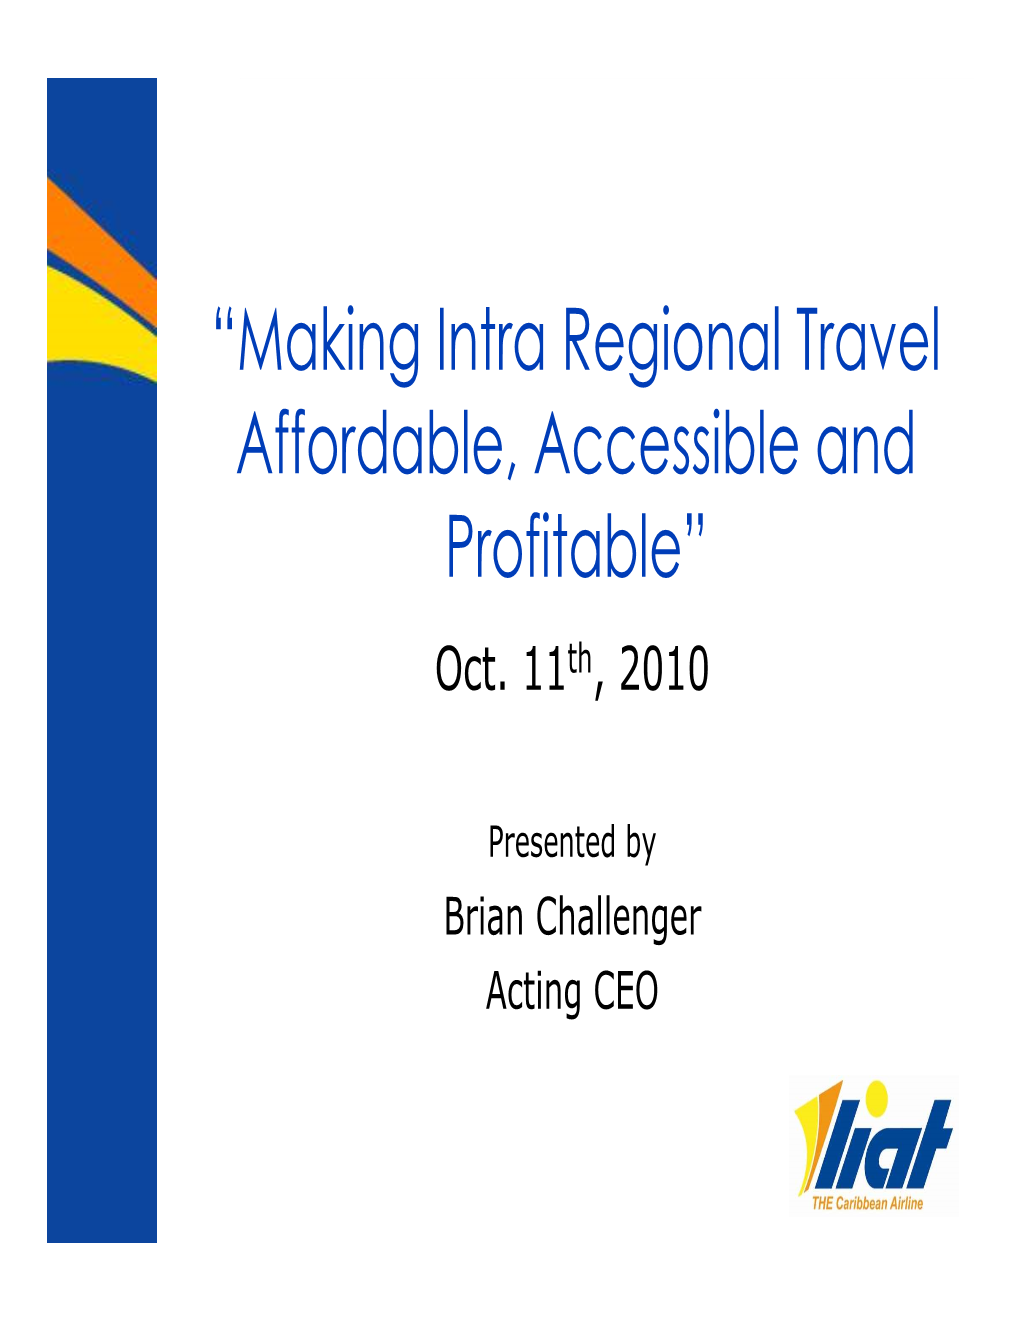 “Making Intra Regional Travel Affordable, Accessible and Profitable” Oct